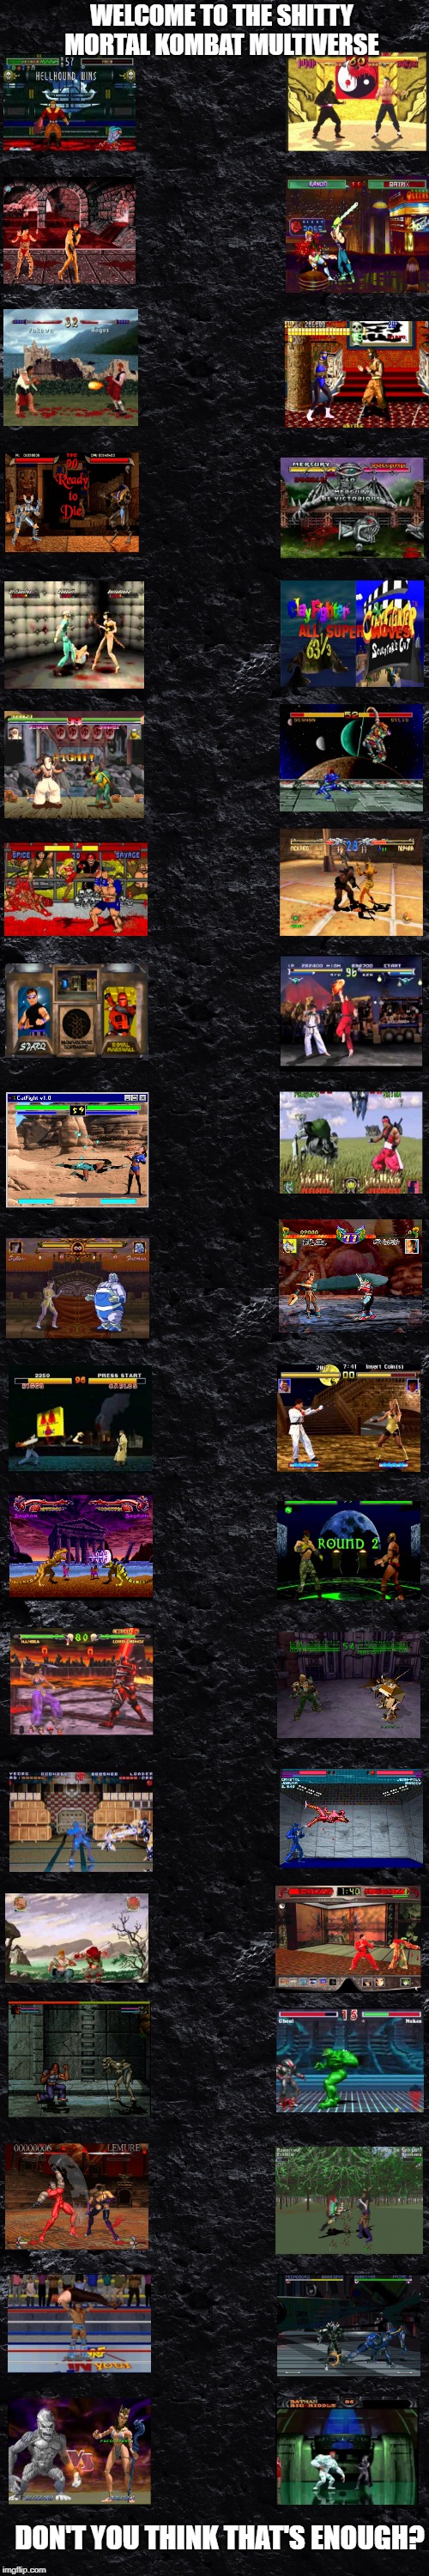 WELCOME TO THE SHITTY MORTAL KOMBAT MULTIVERSE; DON'T YOU THINK THAT'S ENOUGH? | image tagged in mortal kombat,rip off,fighting,horrible | made w/ Imgflip meme maker